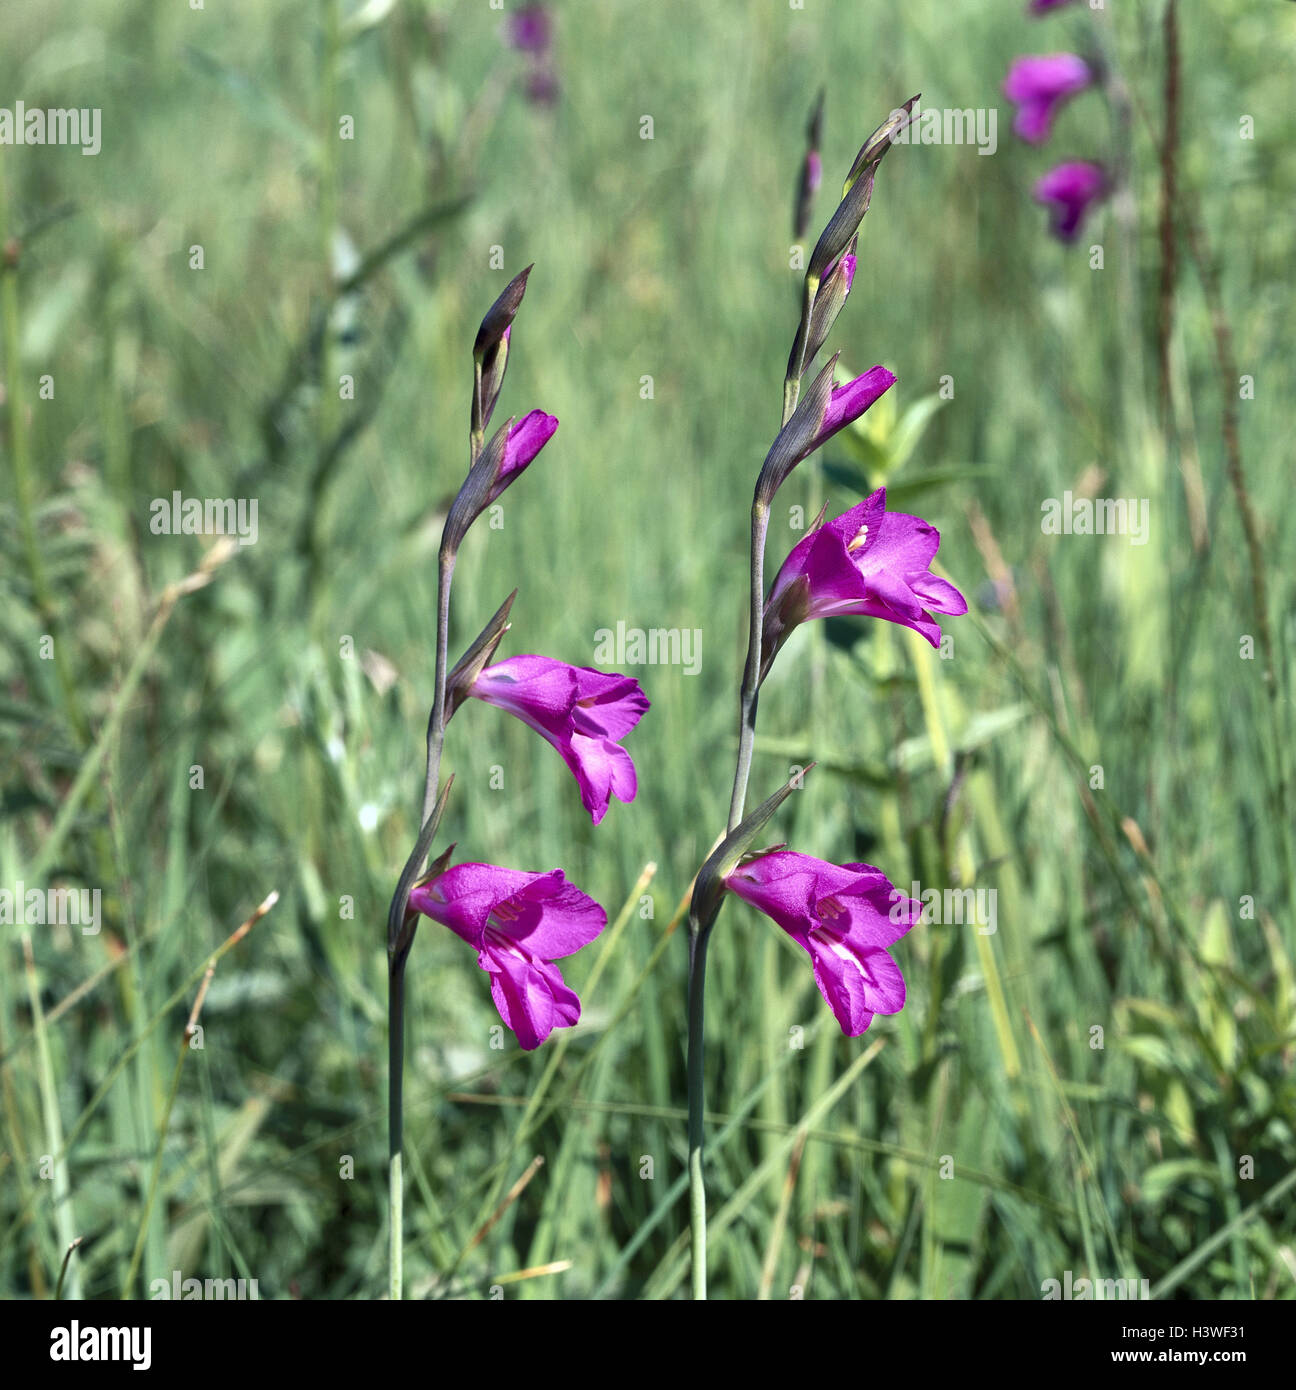 Sumpf-Siegwurz, Gladiolus palustris, detail, nature, botany, flora, plants, flowers, meadow flowers, Siegwurz, Sumpfsiegwurz, marsh gladiolus, Gladiolus, iris plant, protected plant, blossoms, blossom, magenta, red, period bloom, from May to June Stock Photo